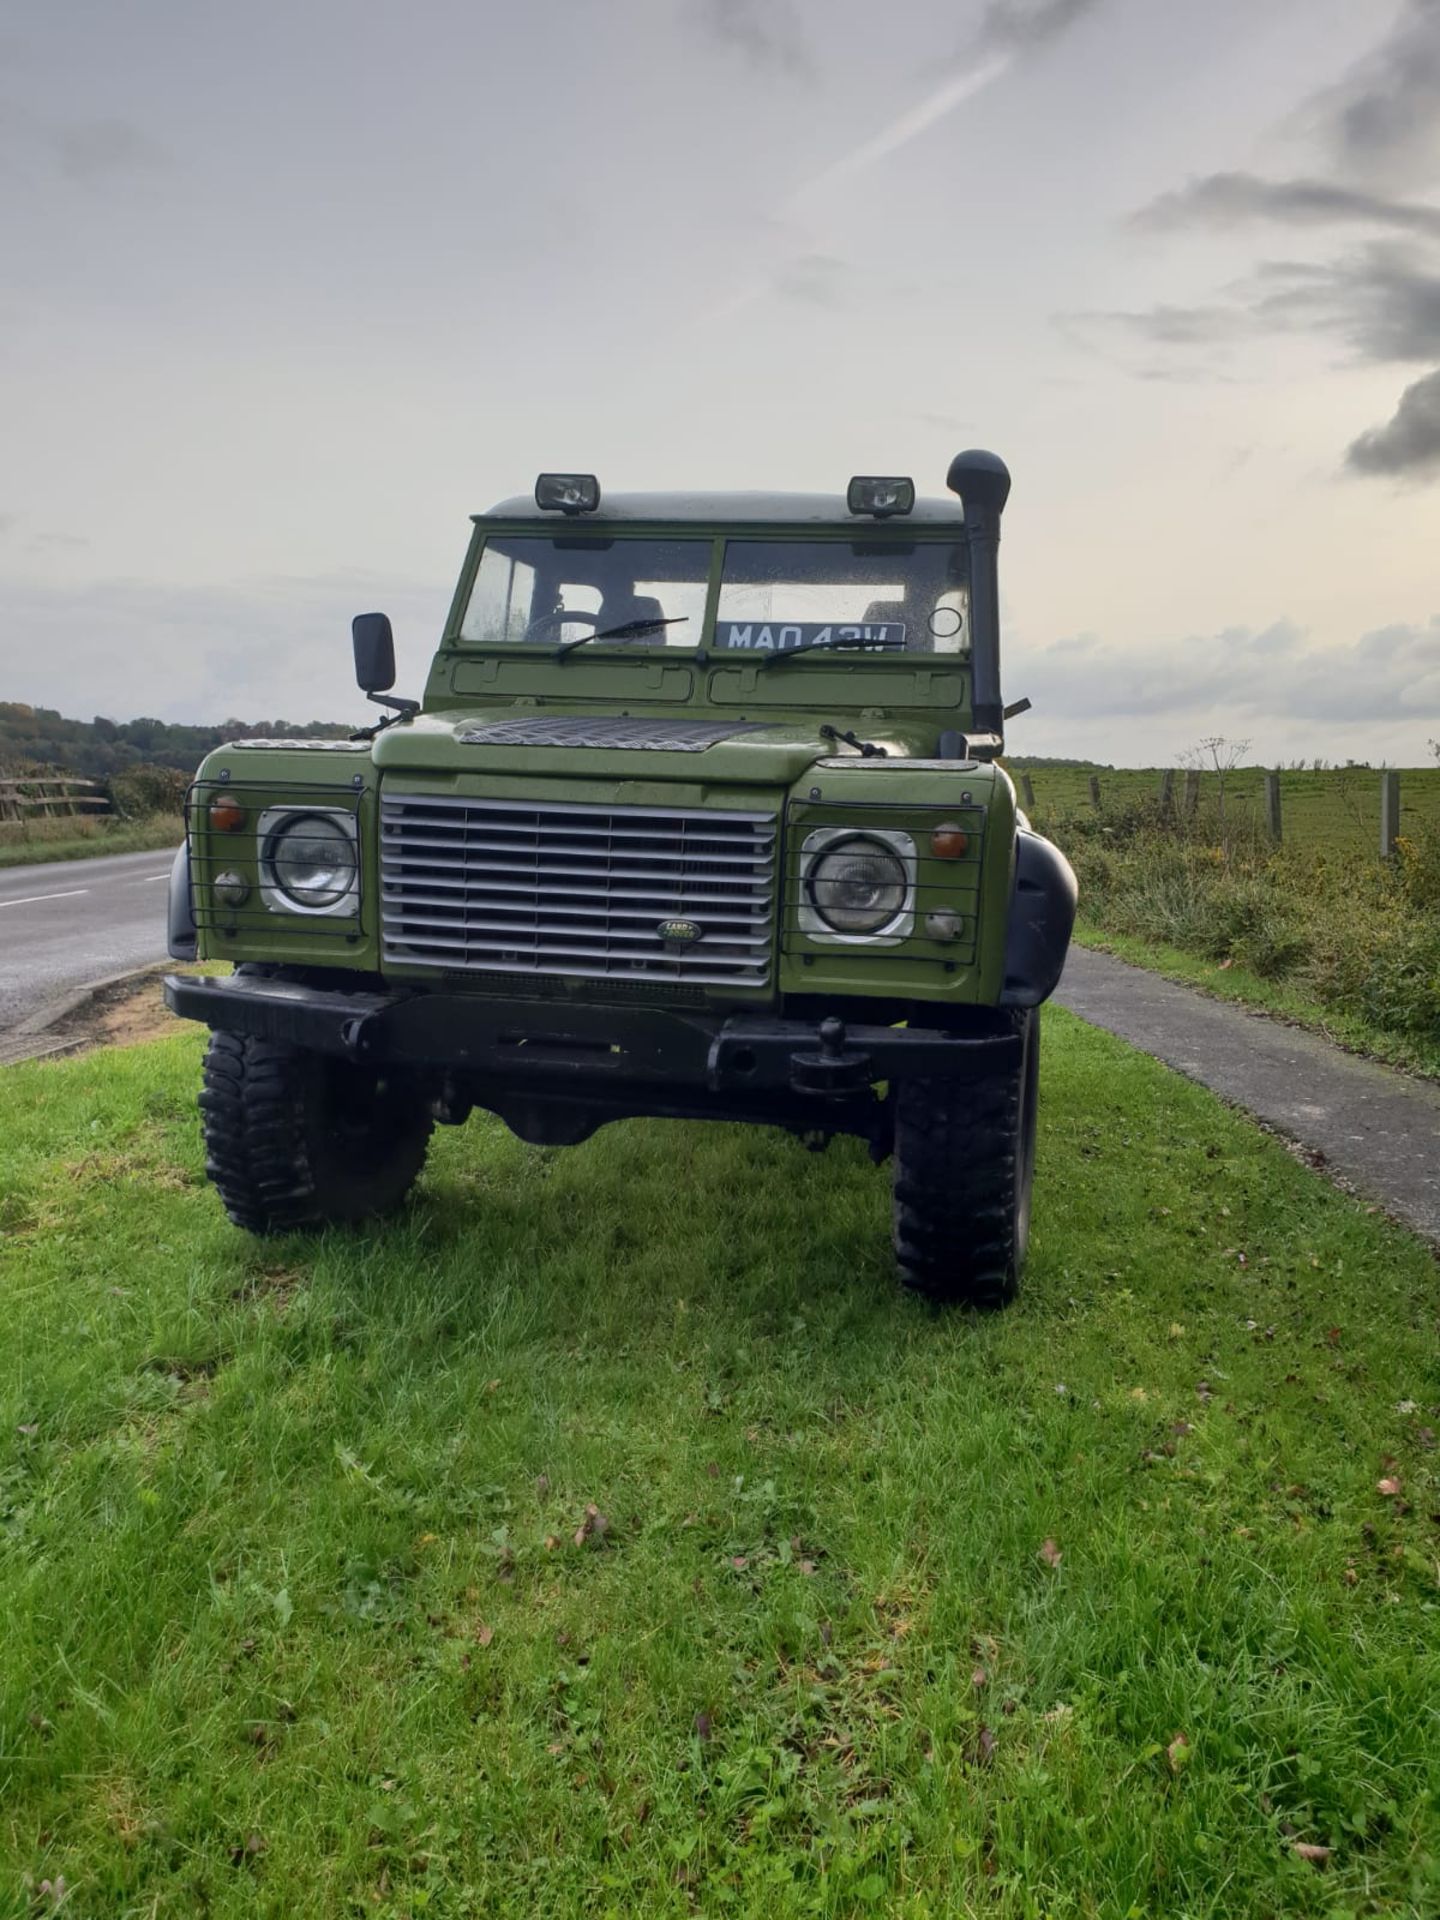 1981 LAND ROVER DEFENDER SERIES 3 TAX EXEMPT, FITTED WITH A 300TDI ENGINE, 4 INCH LIFT KIT *NO VAT* - Image 3 of 11